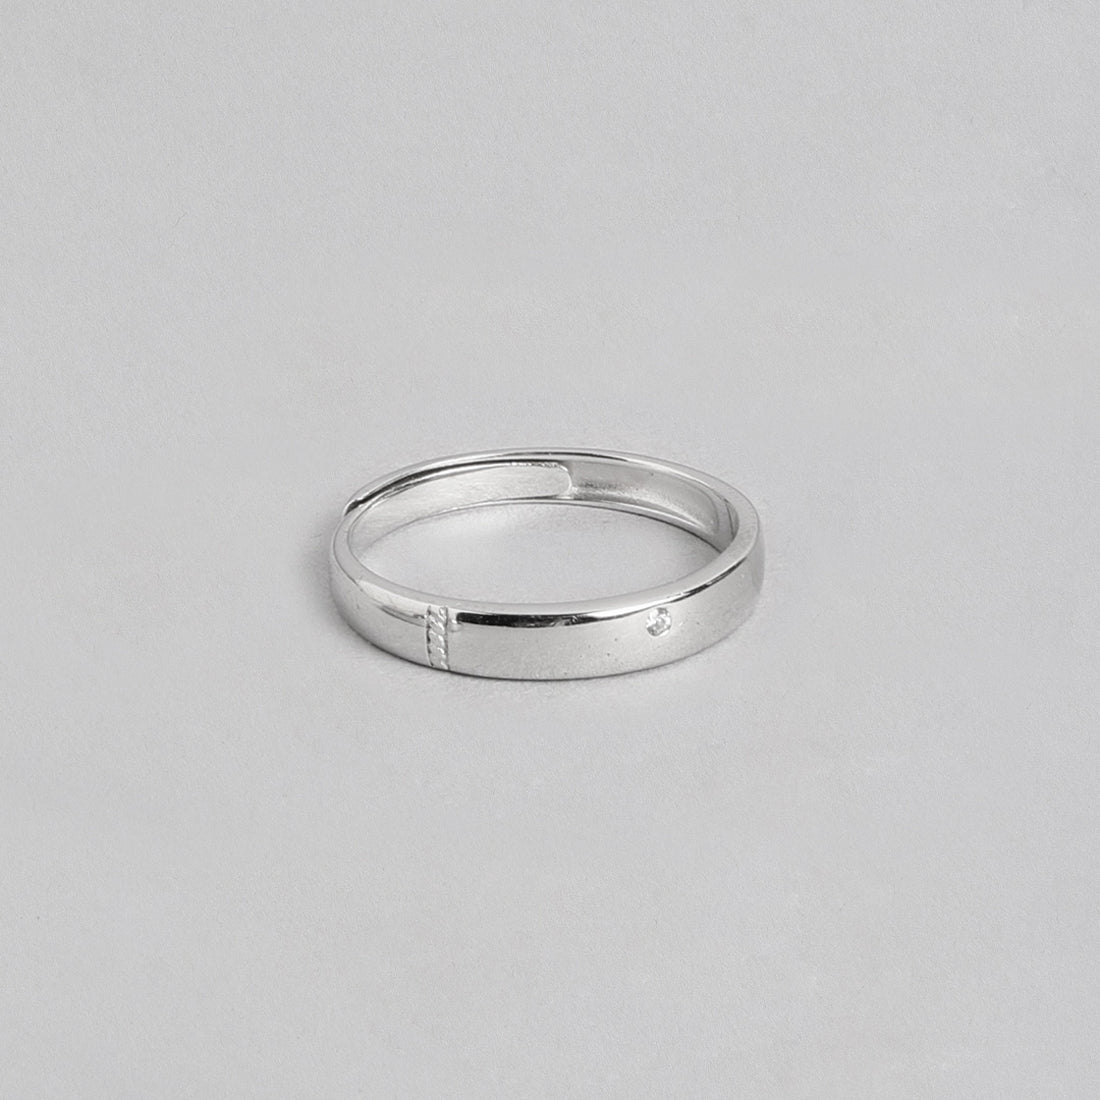 Minimal Band Rhodium Plated 925 Silver Ring for Him